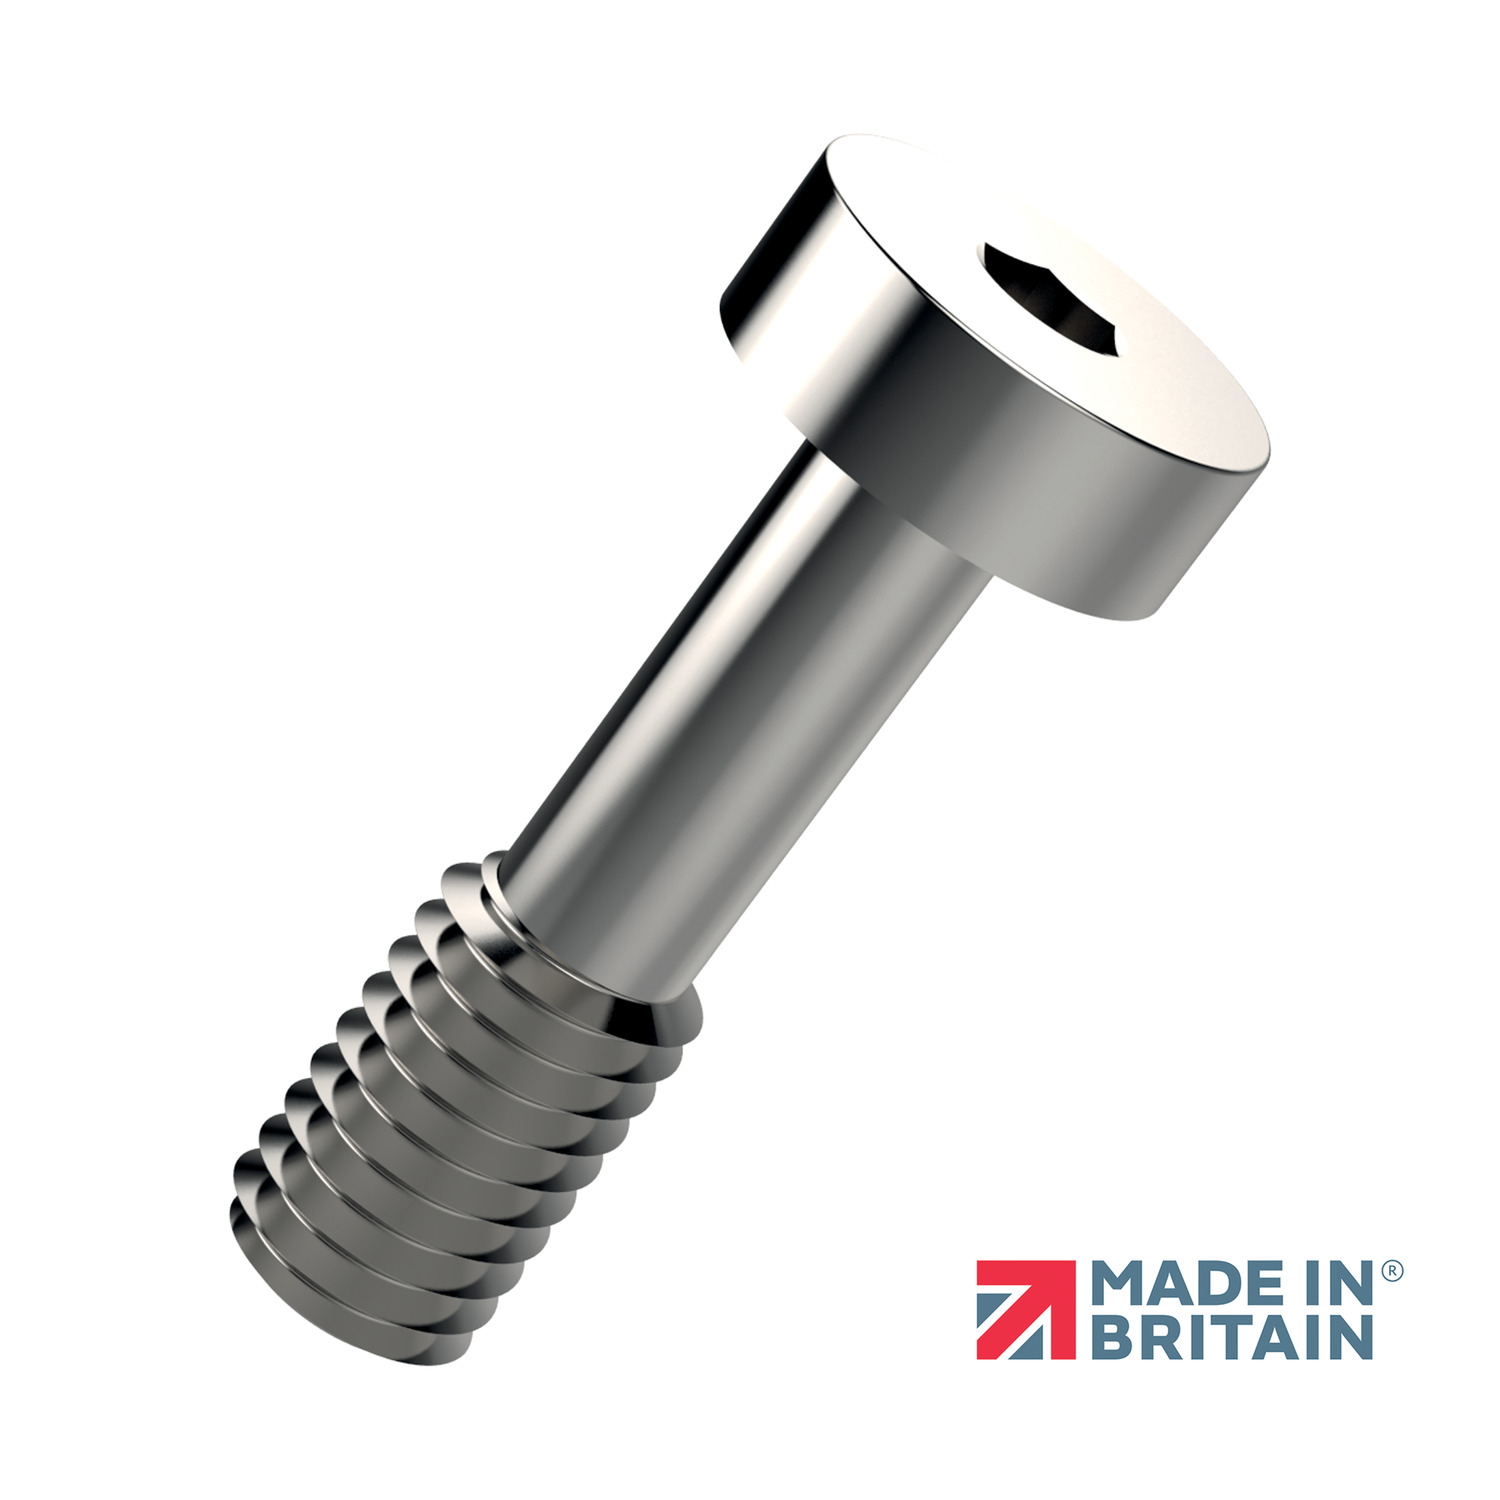 Captive Screws - Cheese Head A captive screw with a cheese head, generally to DIN 84. Often used with our captive washers (36691) or retaining flanges (36692) - for sheet metal applications.